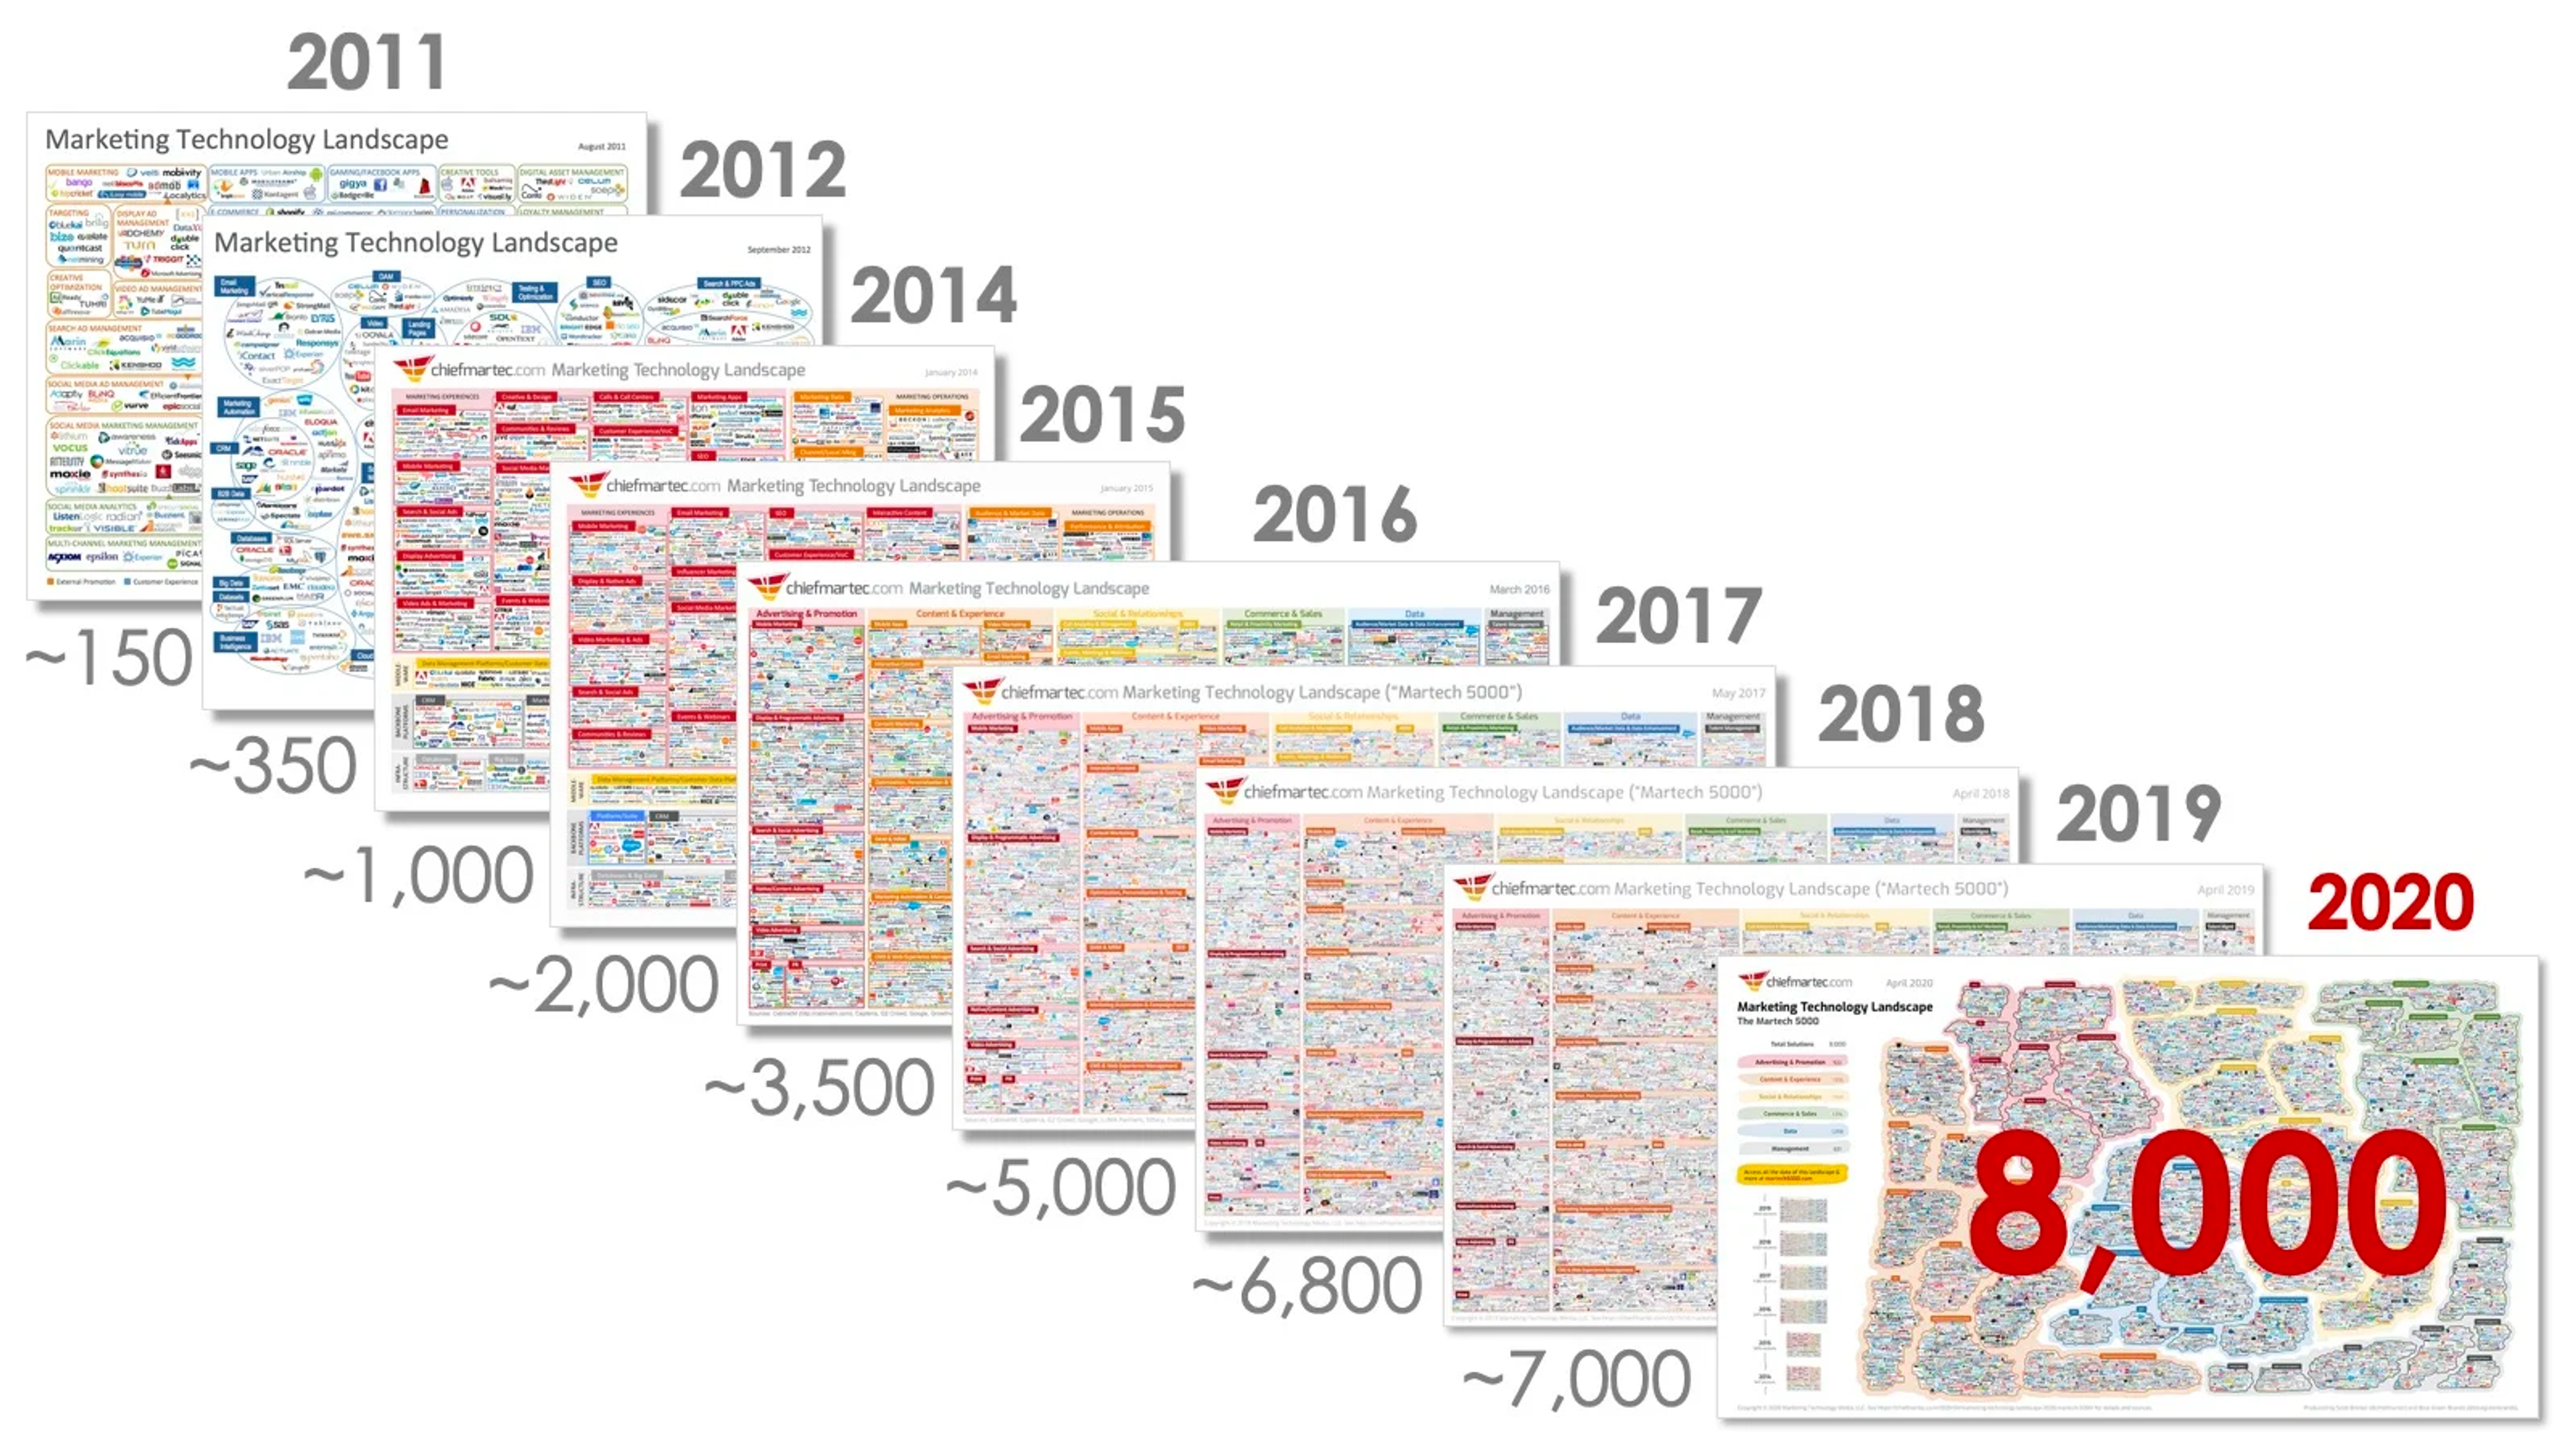 Martech landscape over the years